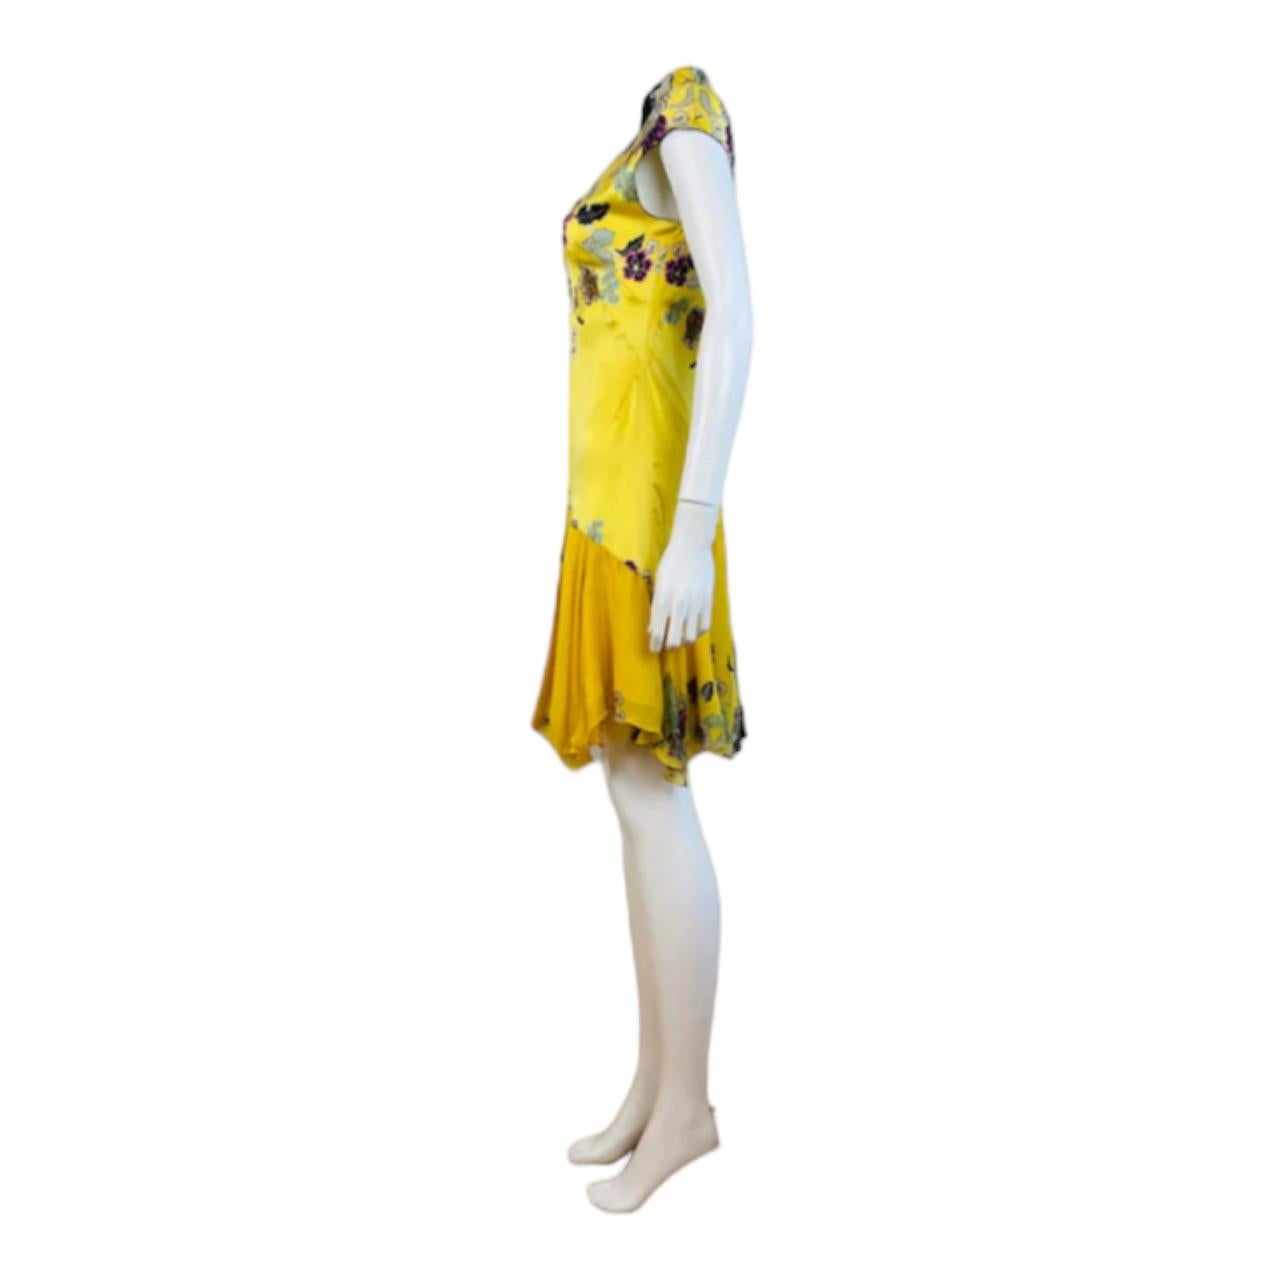 Vintage Roberto Cavalli S/S 2003 Chinoiserie Yellow Floral Silk Mini Dress For Sale 2